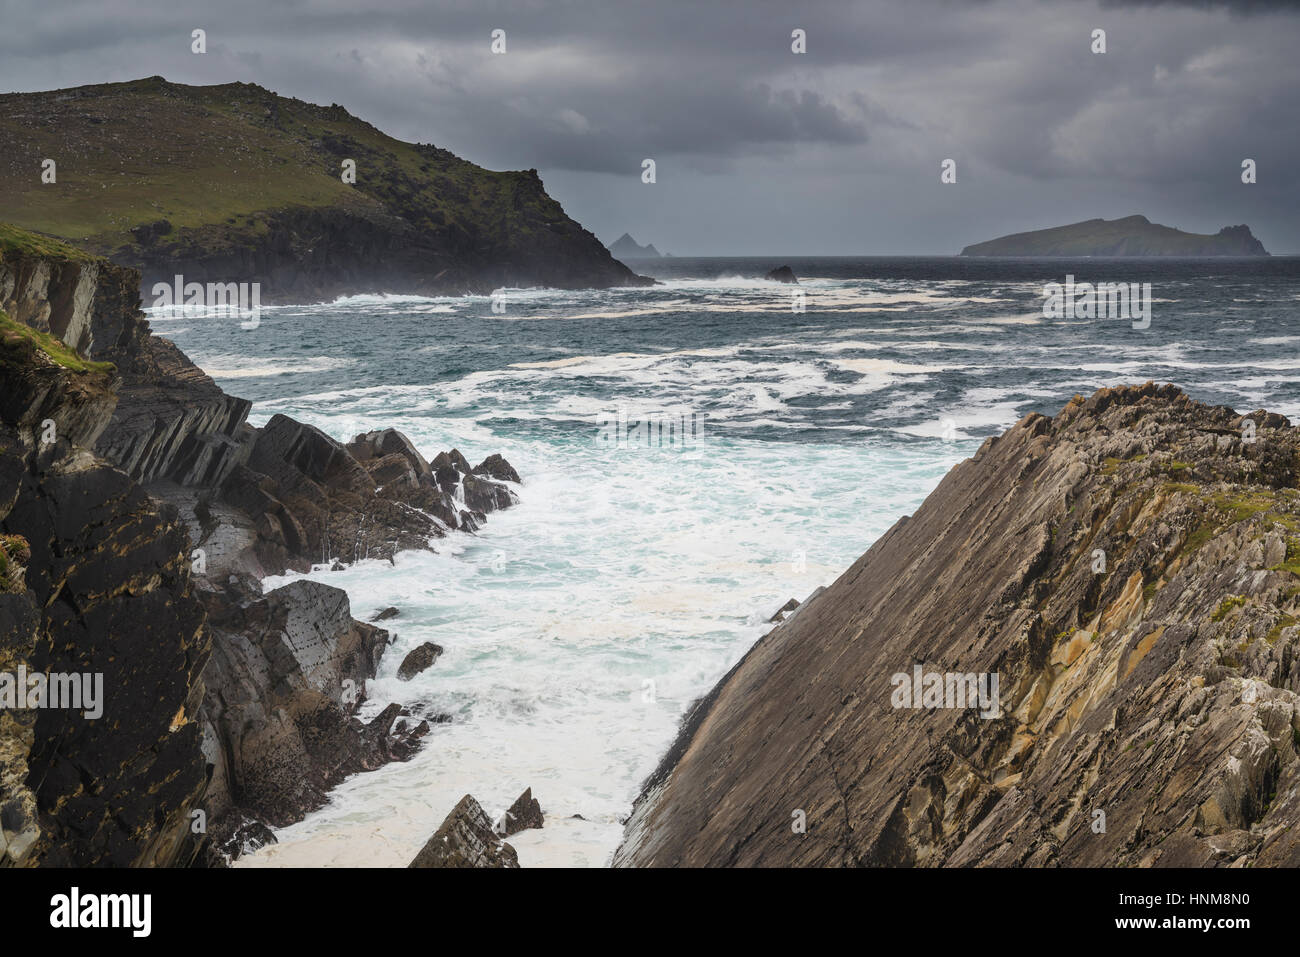 Clogher Bay, Clogher, Dingle Peninsula, County Kerry, Ireland Stock Photo